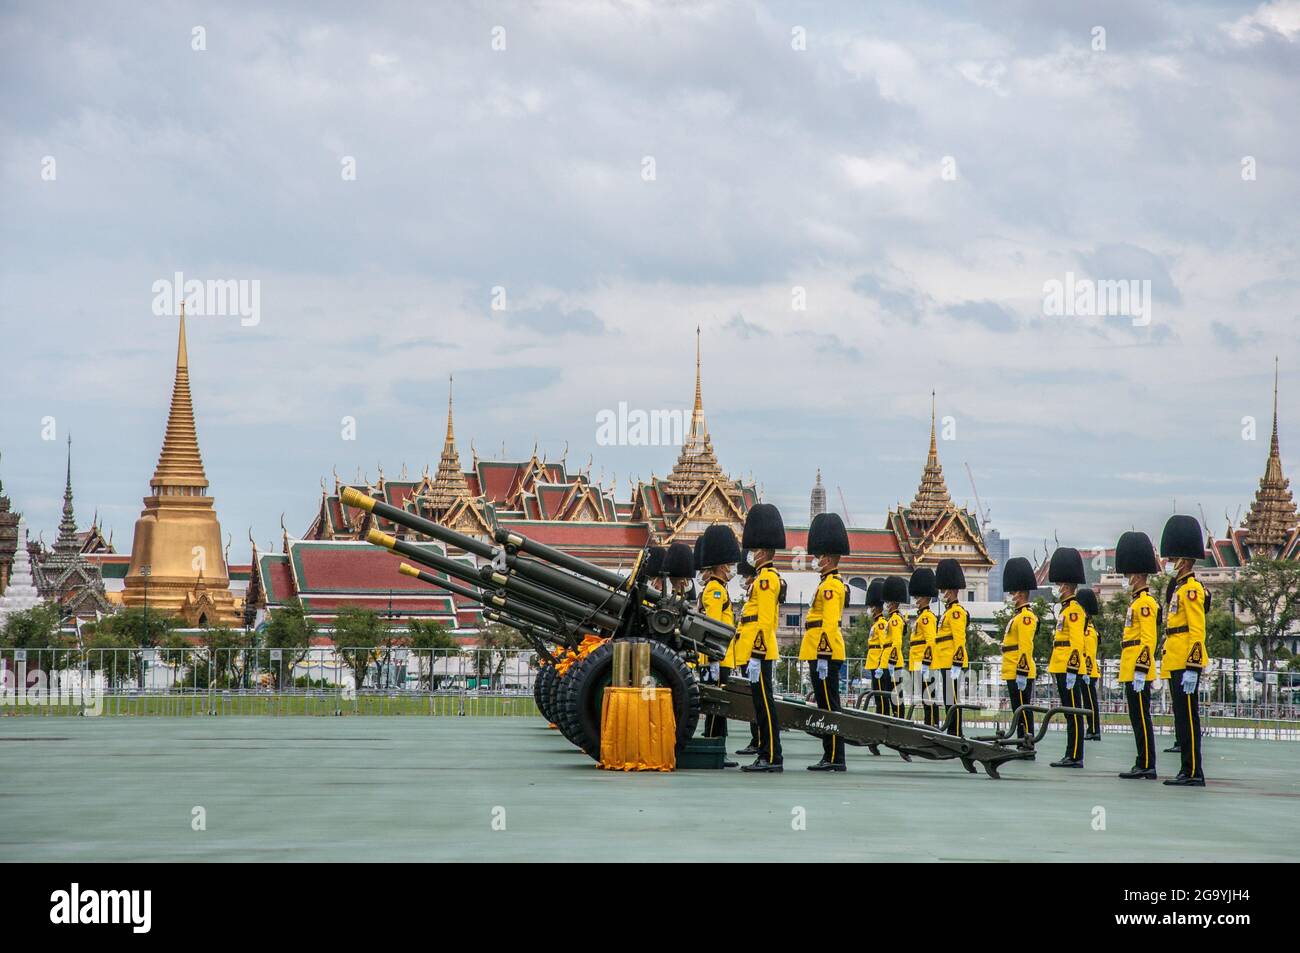 Bangkok, Thailand. 28th July, 2021. Thai Royal Guards prepare for a 21-gun salute to mark the 69th birthday of King Maha Vajiralongkorn also known as King Rama X. A company of the 1st Artillery Battalion, 1st Field Artillery Regiment, King's Guard, performed a 21-gun salute to mark the 69th birthday of Her Majesty King Maha Vajiralongkorn (King Rama X) on 28 July 2021.The military ceremony in honour of the King was held at the royal parade ground of Sanam Luang, adjacent to the Grand Palace. (Photo by Peerapon Boonyakiat/SOPA Images/Sipa USA) Credit: Sipa USA/Alamy Live News Stock Photo